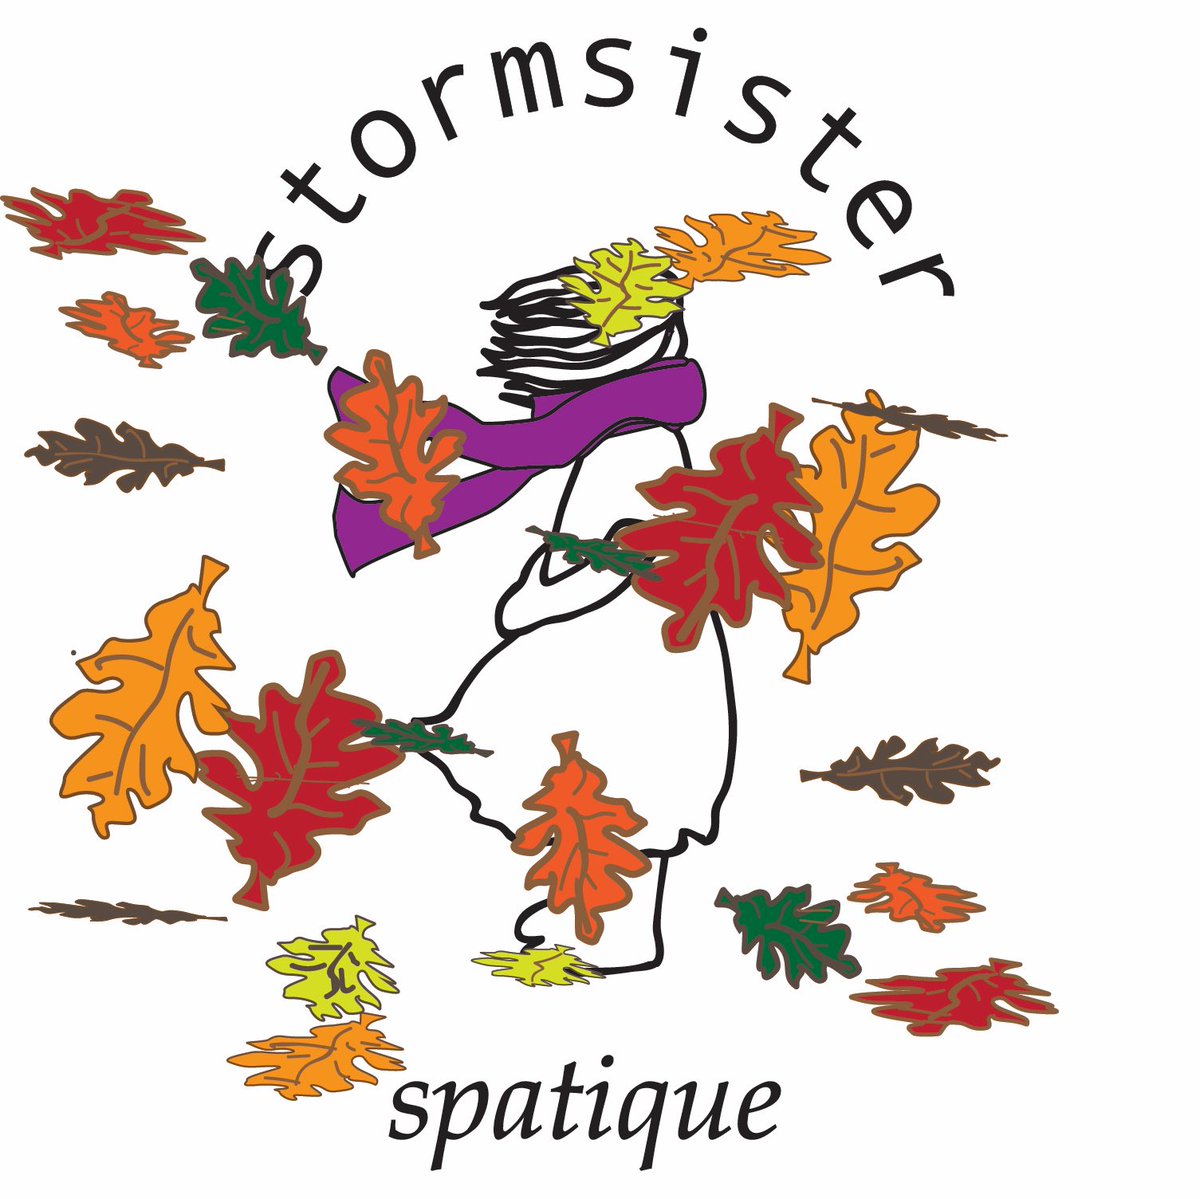 Happy Fall🍁from StormSister Spatique

app.robly.com/archive?id=329…

#beauty 💋 #skincare #bodycare #shopsmall 🛍 #StormSisterSpatique #LoveSaintPaul #beautyshop #letsgrowstpl #skin #grooming #bath 🛁 #saintpaul #gift 🎁 #stpaul #haircare 💇🏽‍♂️ #MN #Minnesota #stpaul4life #aromatherapy